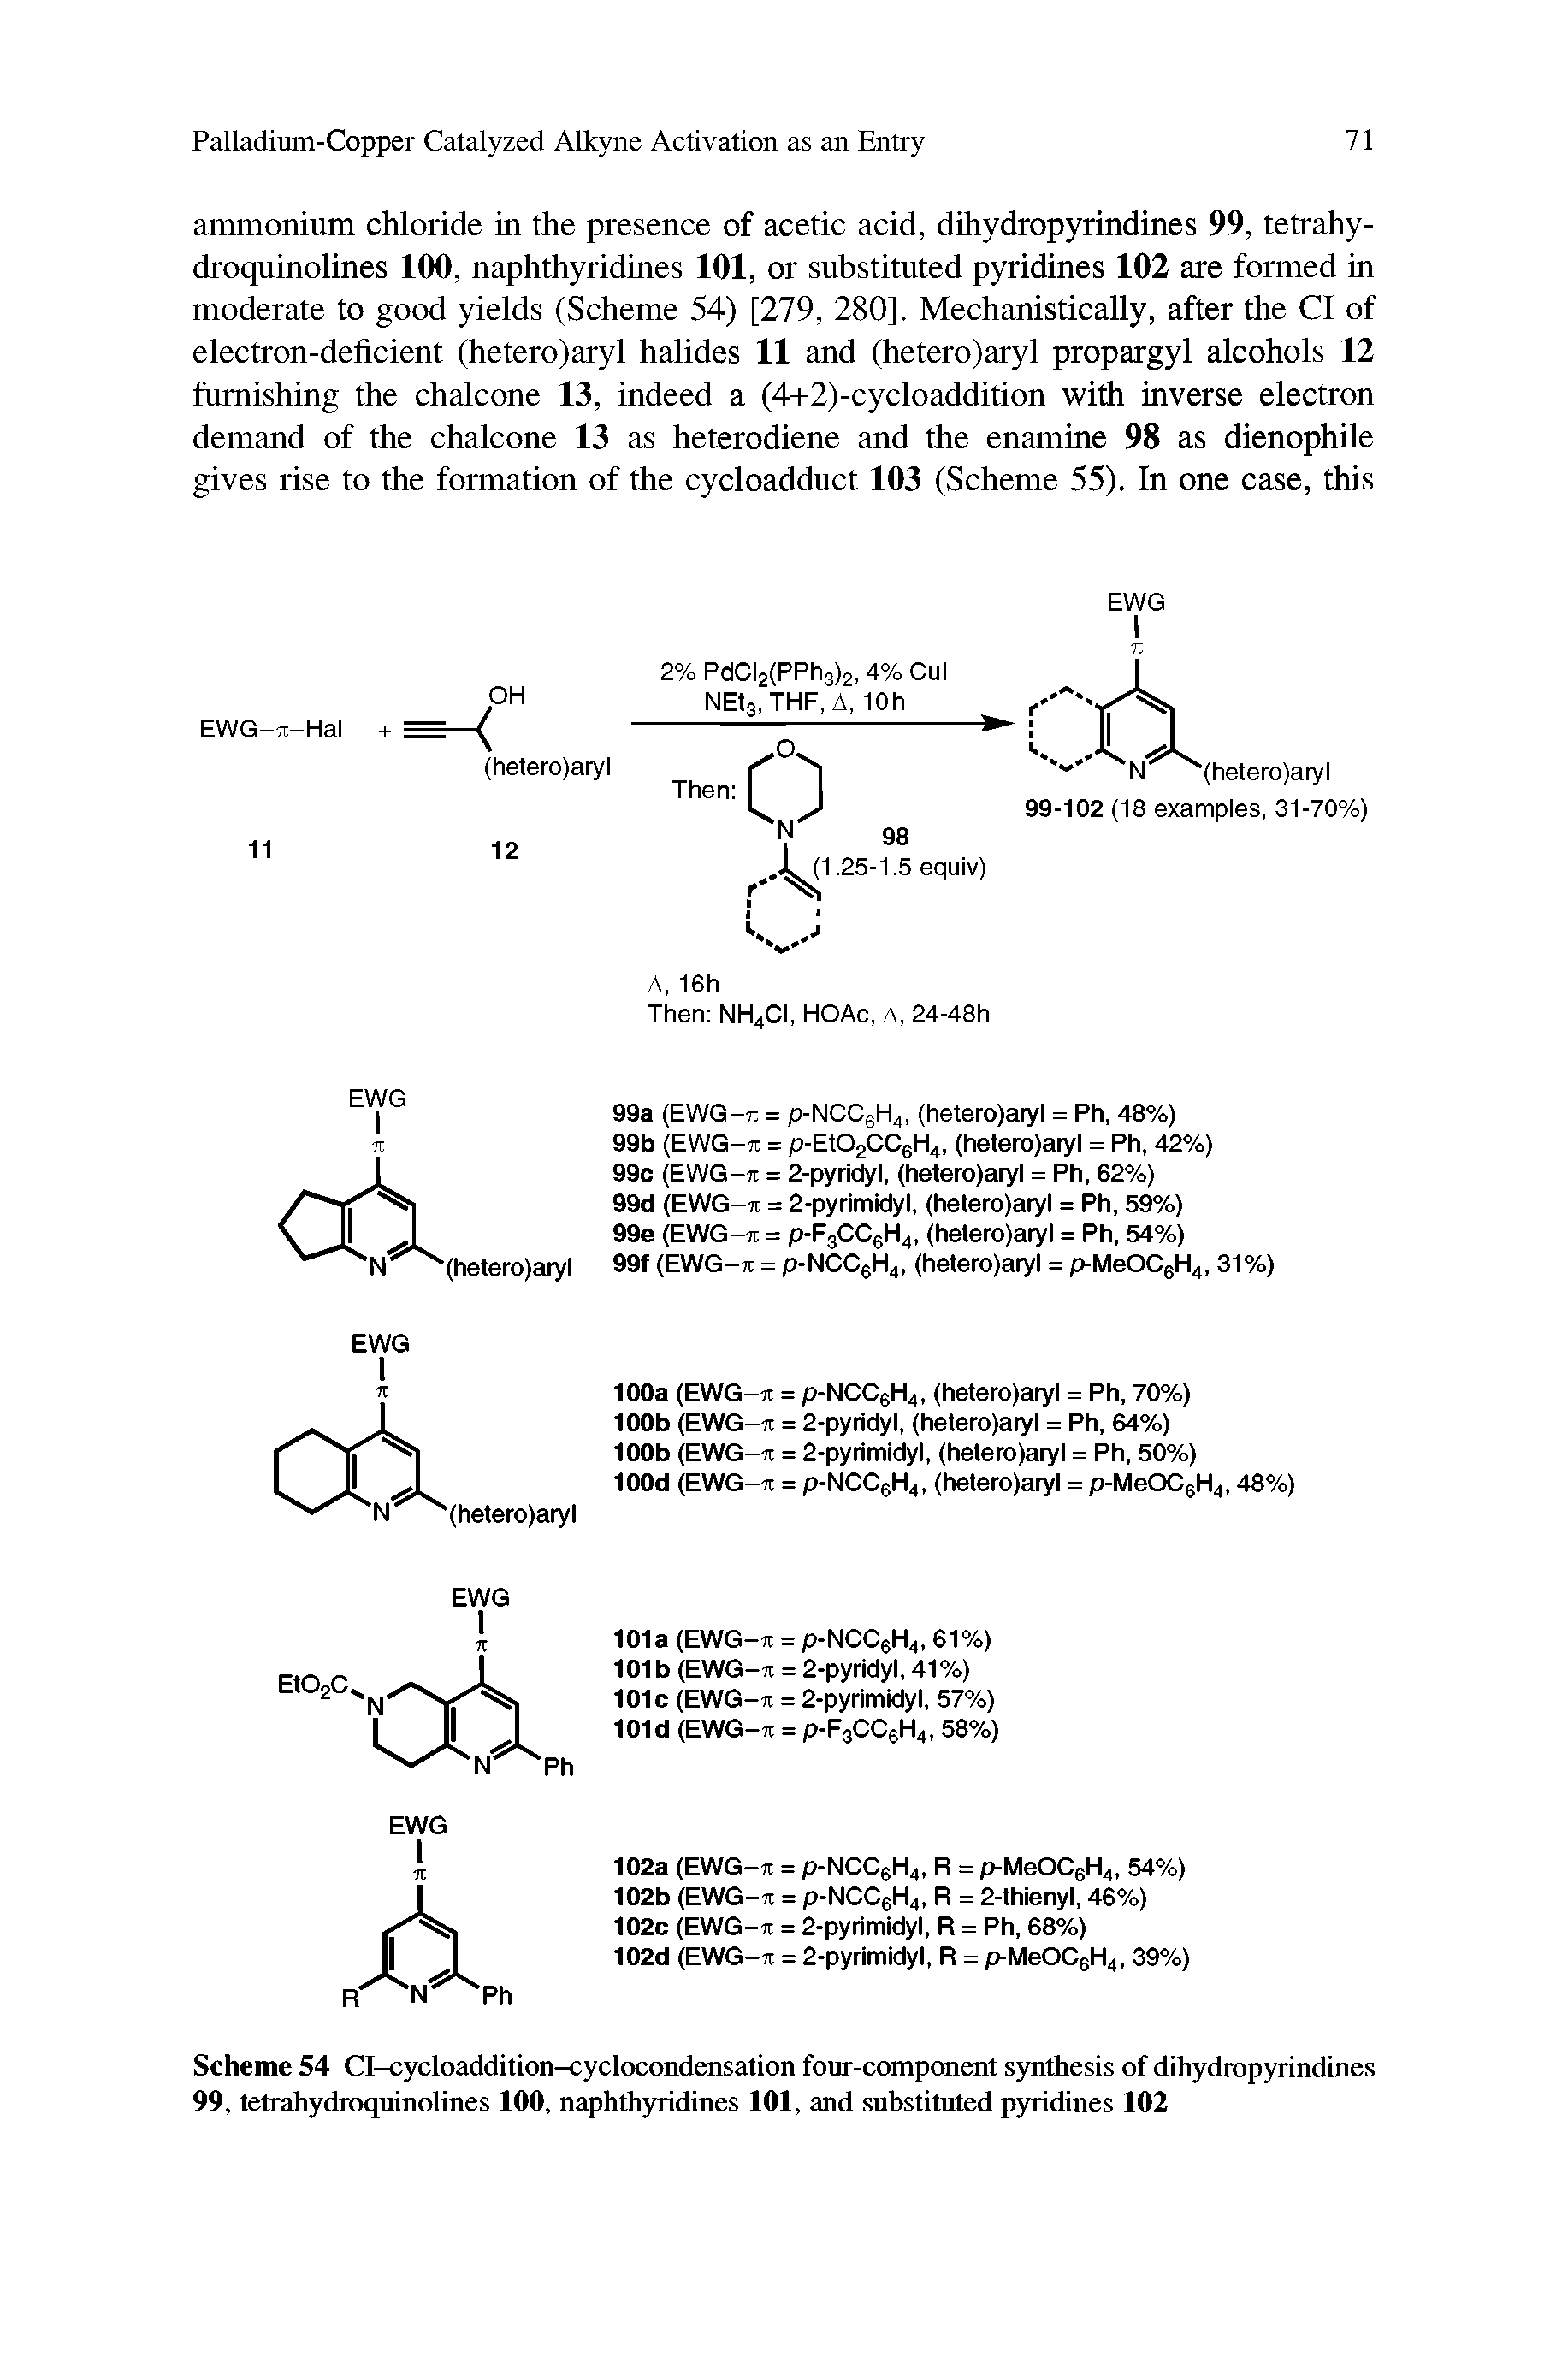 Scheme 54 Cl-cycloaddition-cyclocondensation four-component synthesis of dihydropyrindines 99, tetrahydroquinolines 100, naphthyridines 101, and substituted pyridines 102...